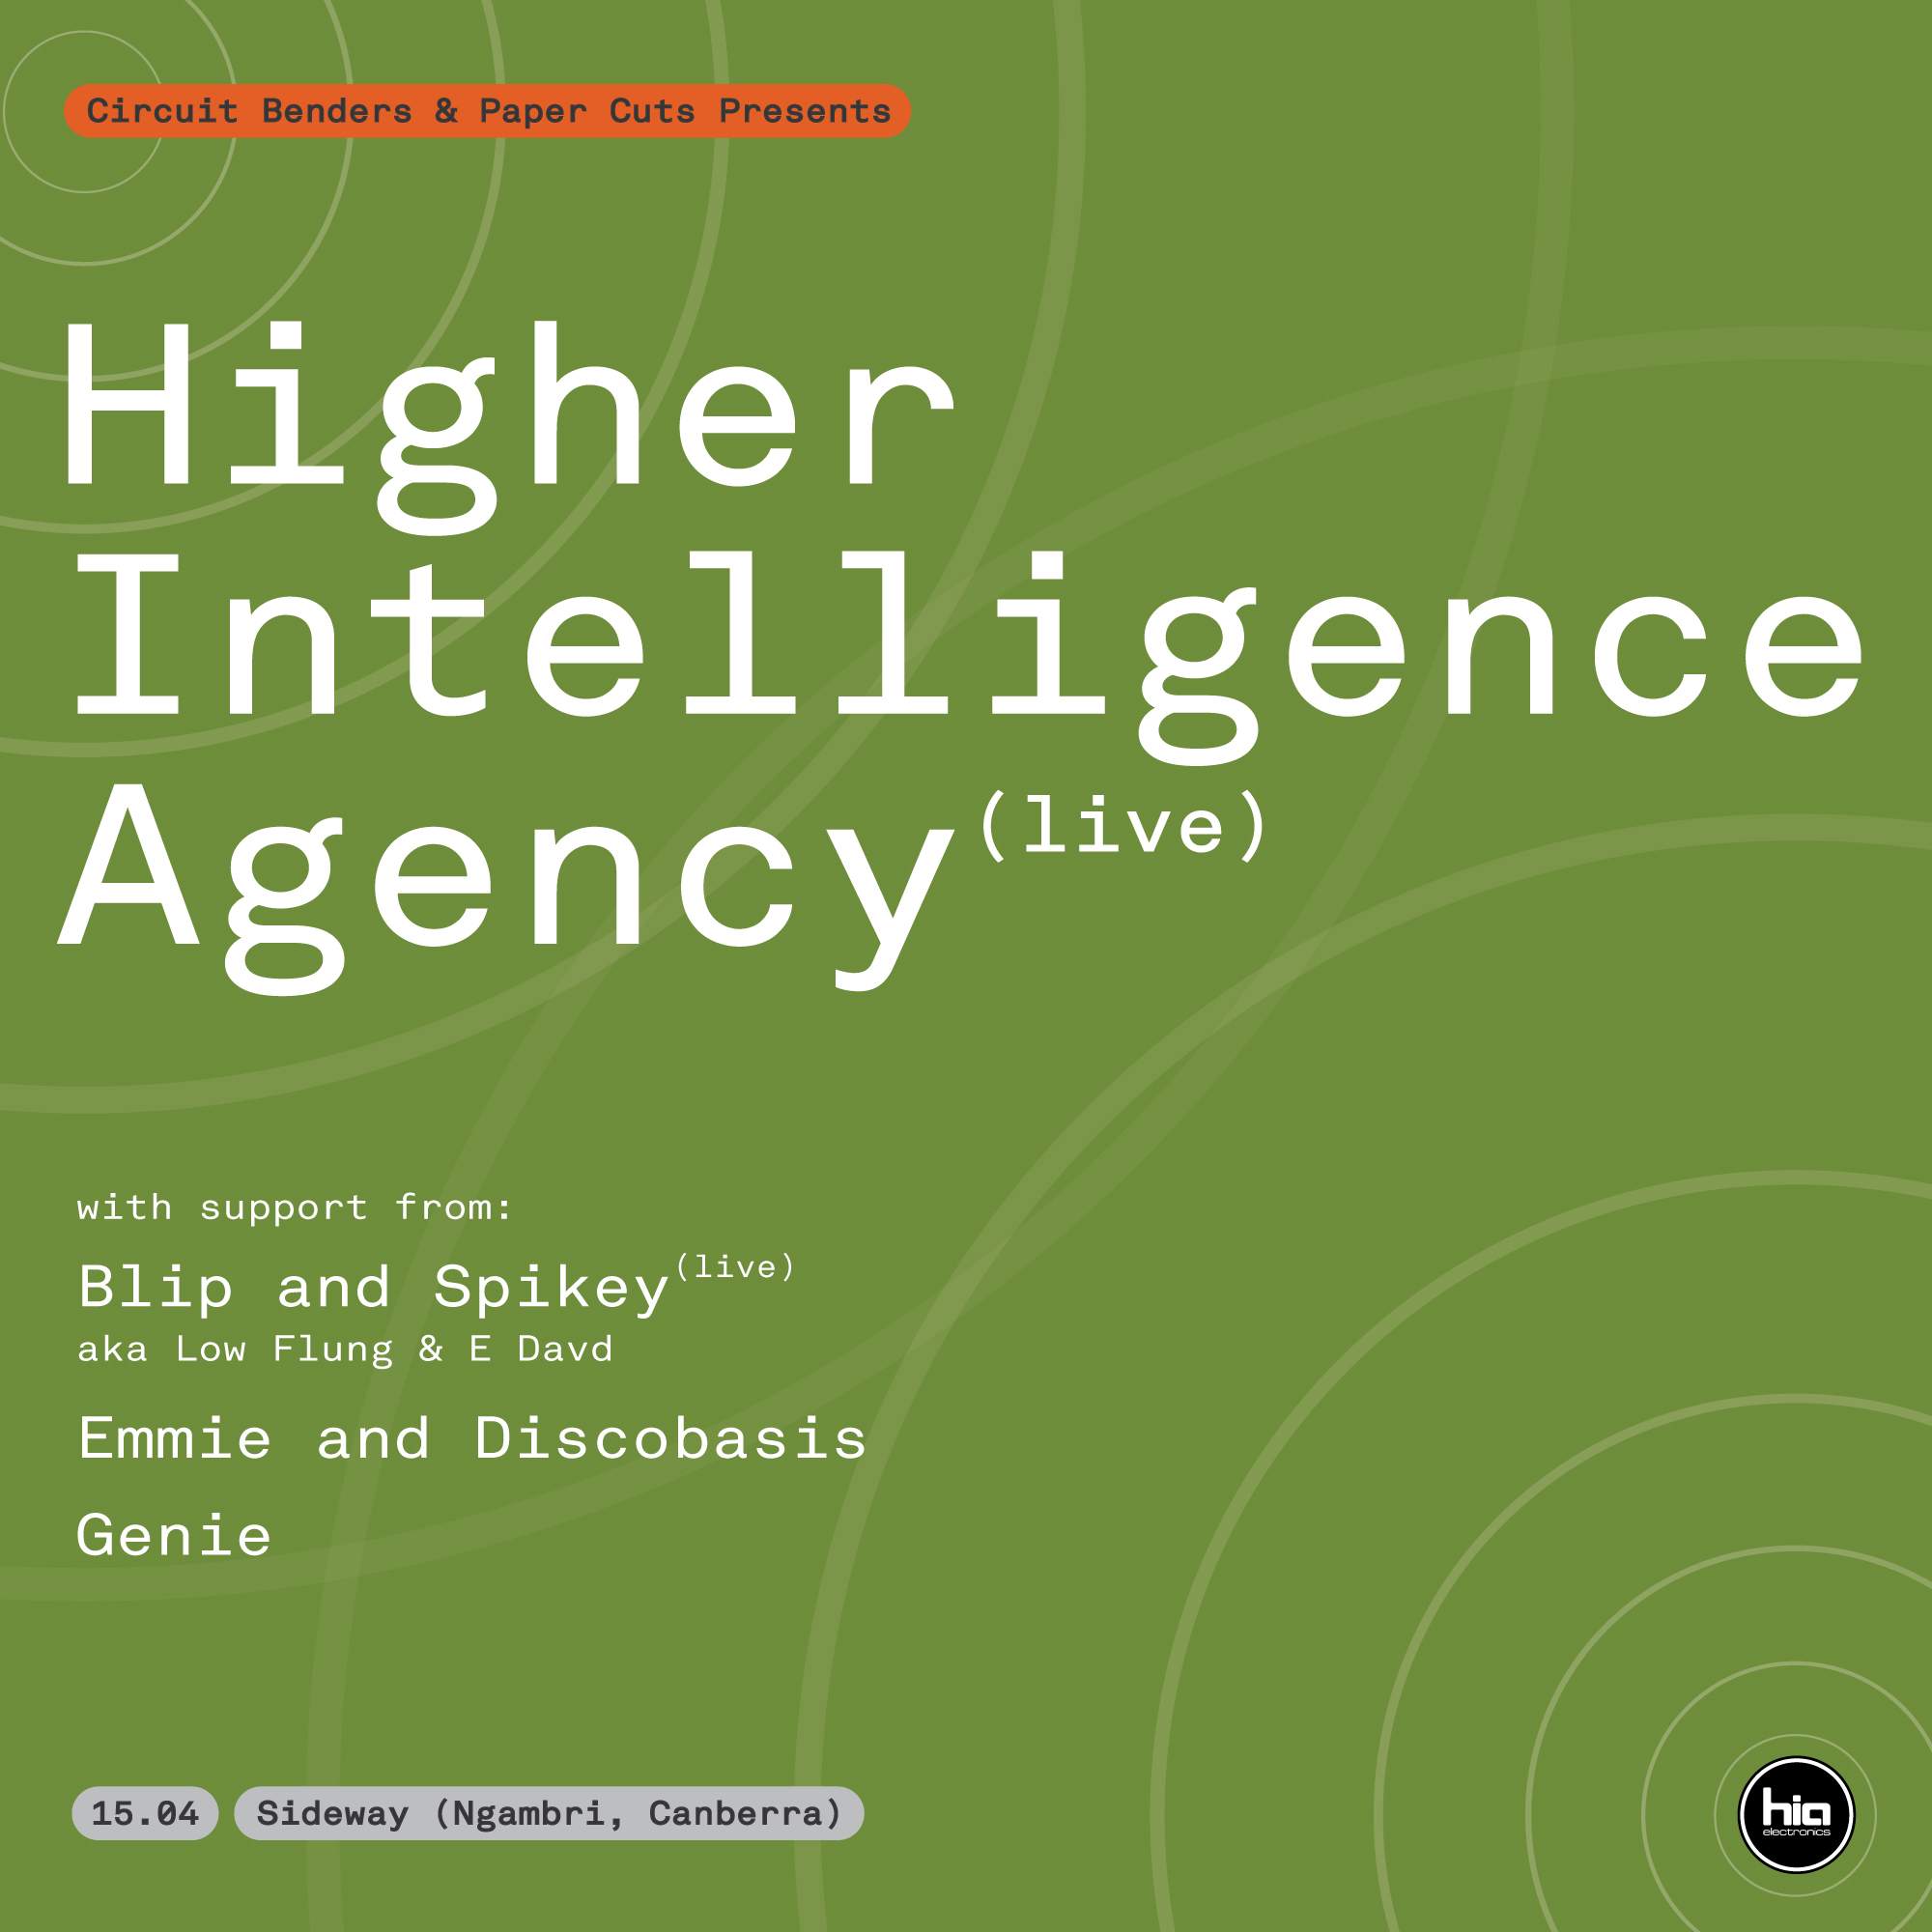 Circuit Benders x Paper-Cuts presents Higher Intelligence Agency (Live / Sideway) - フライヤー表